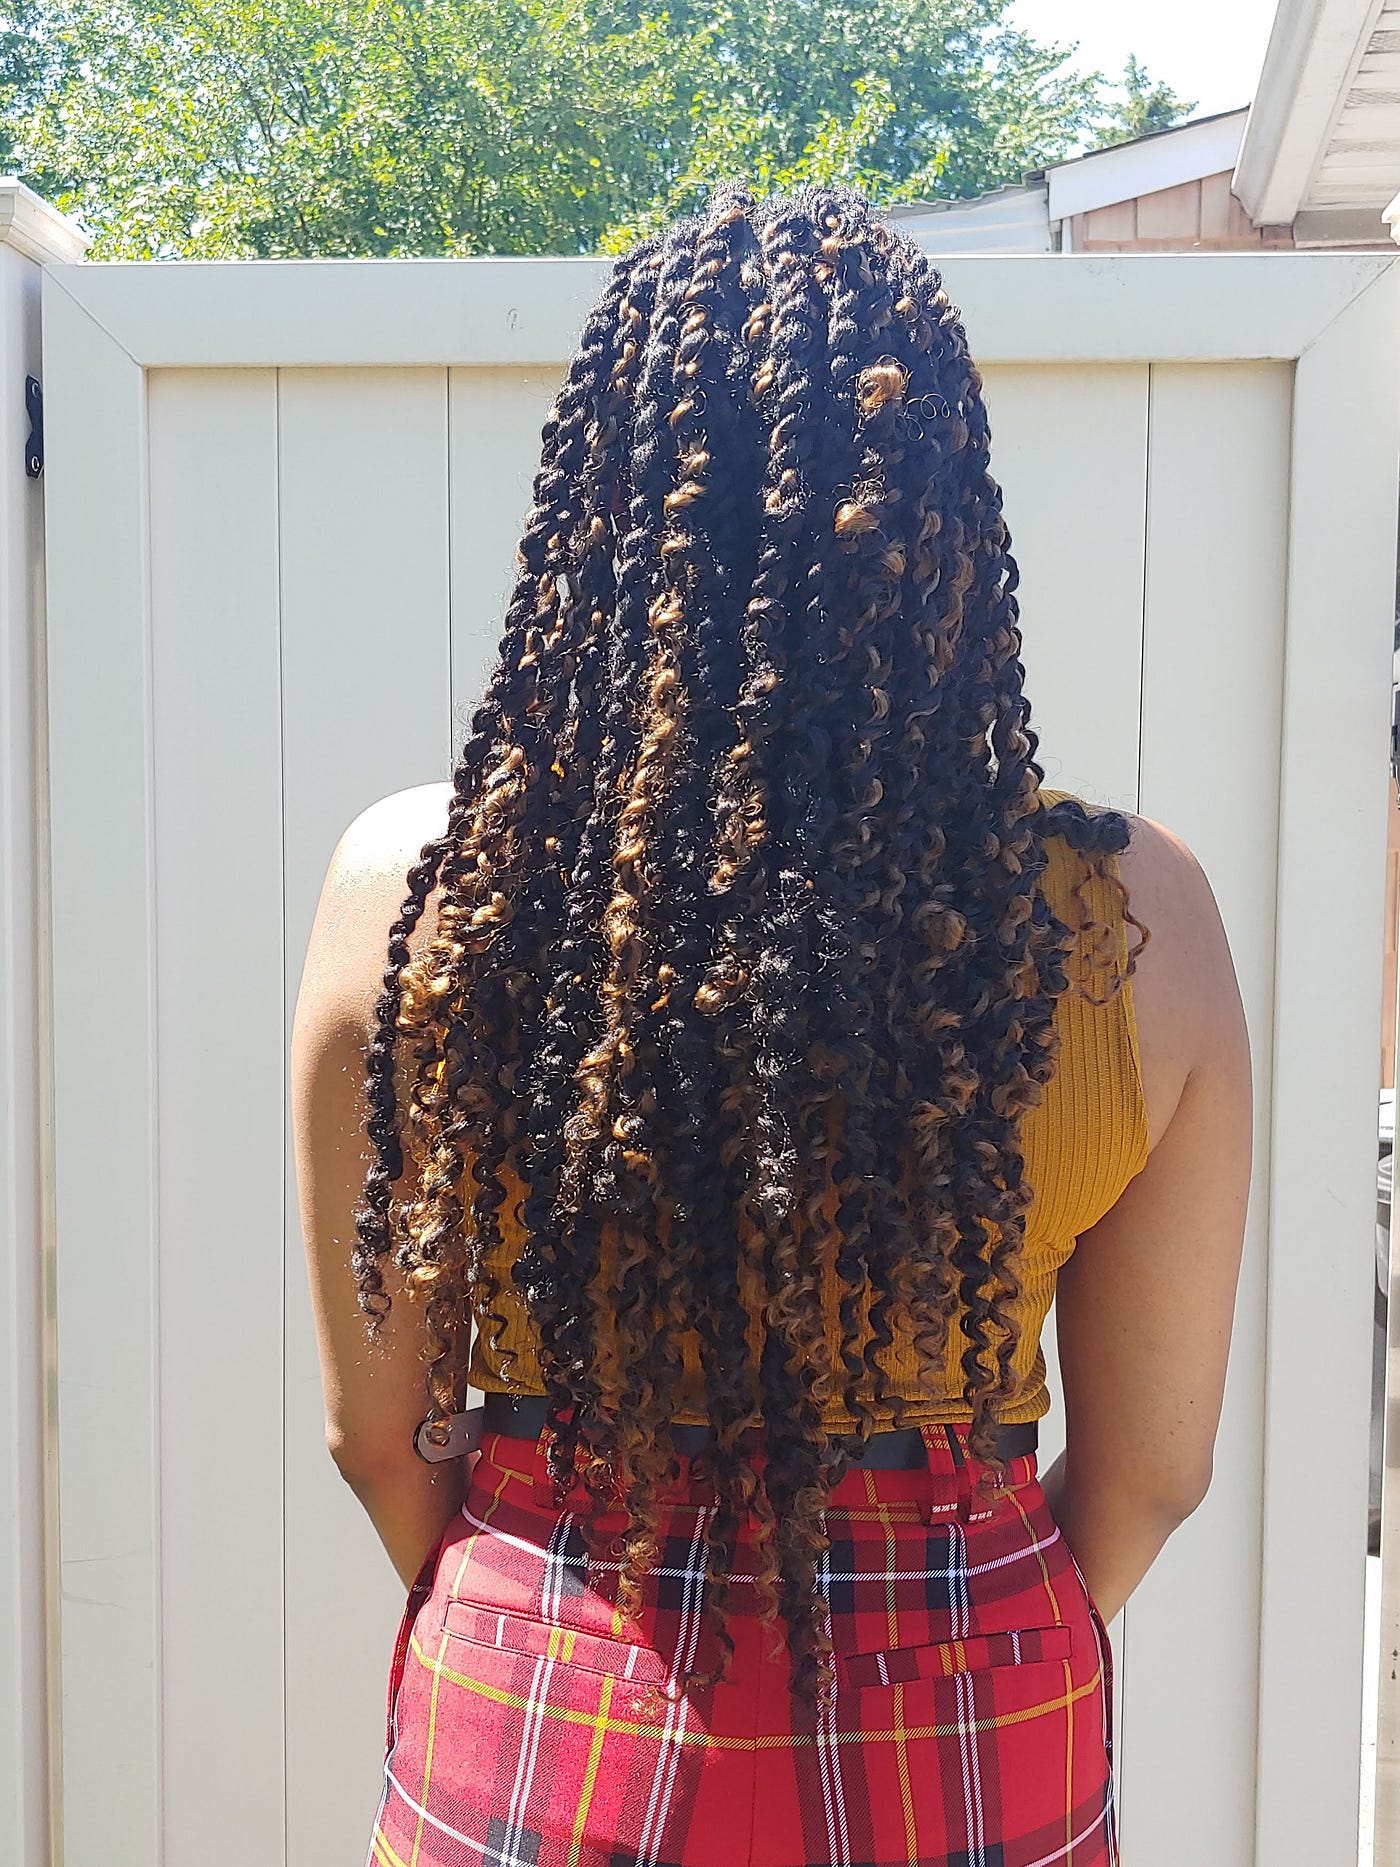 5 Things You Should Know before Wearing Passion Twists, by Cynthia, Cynthia's Mindset